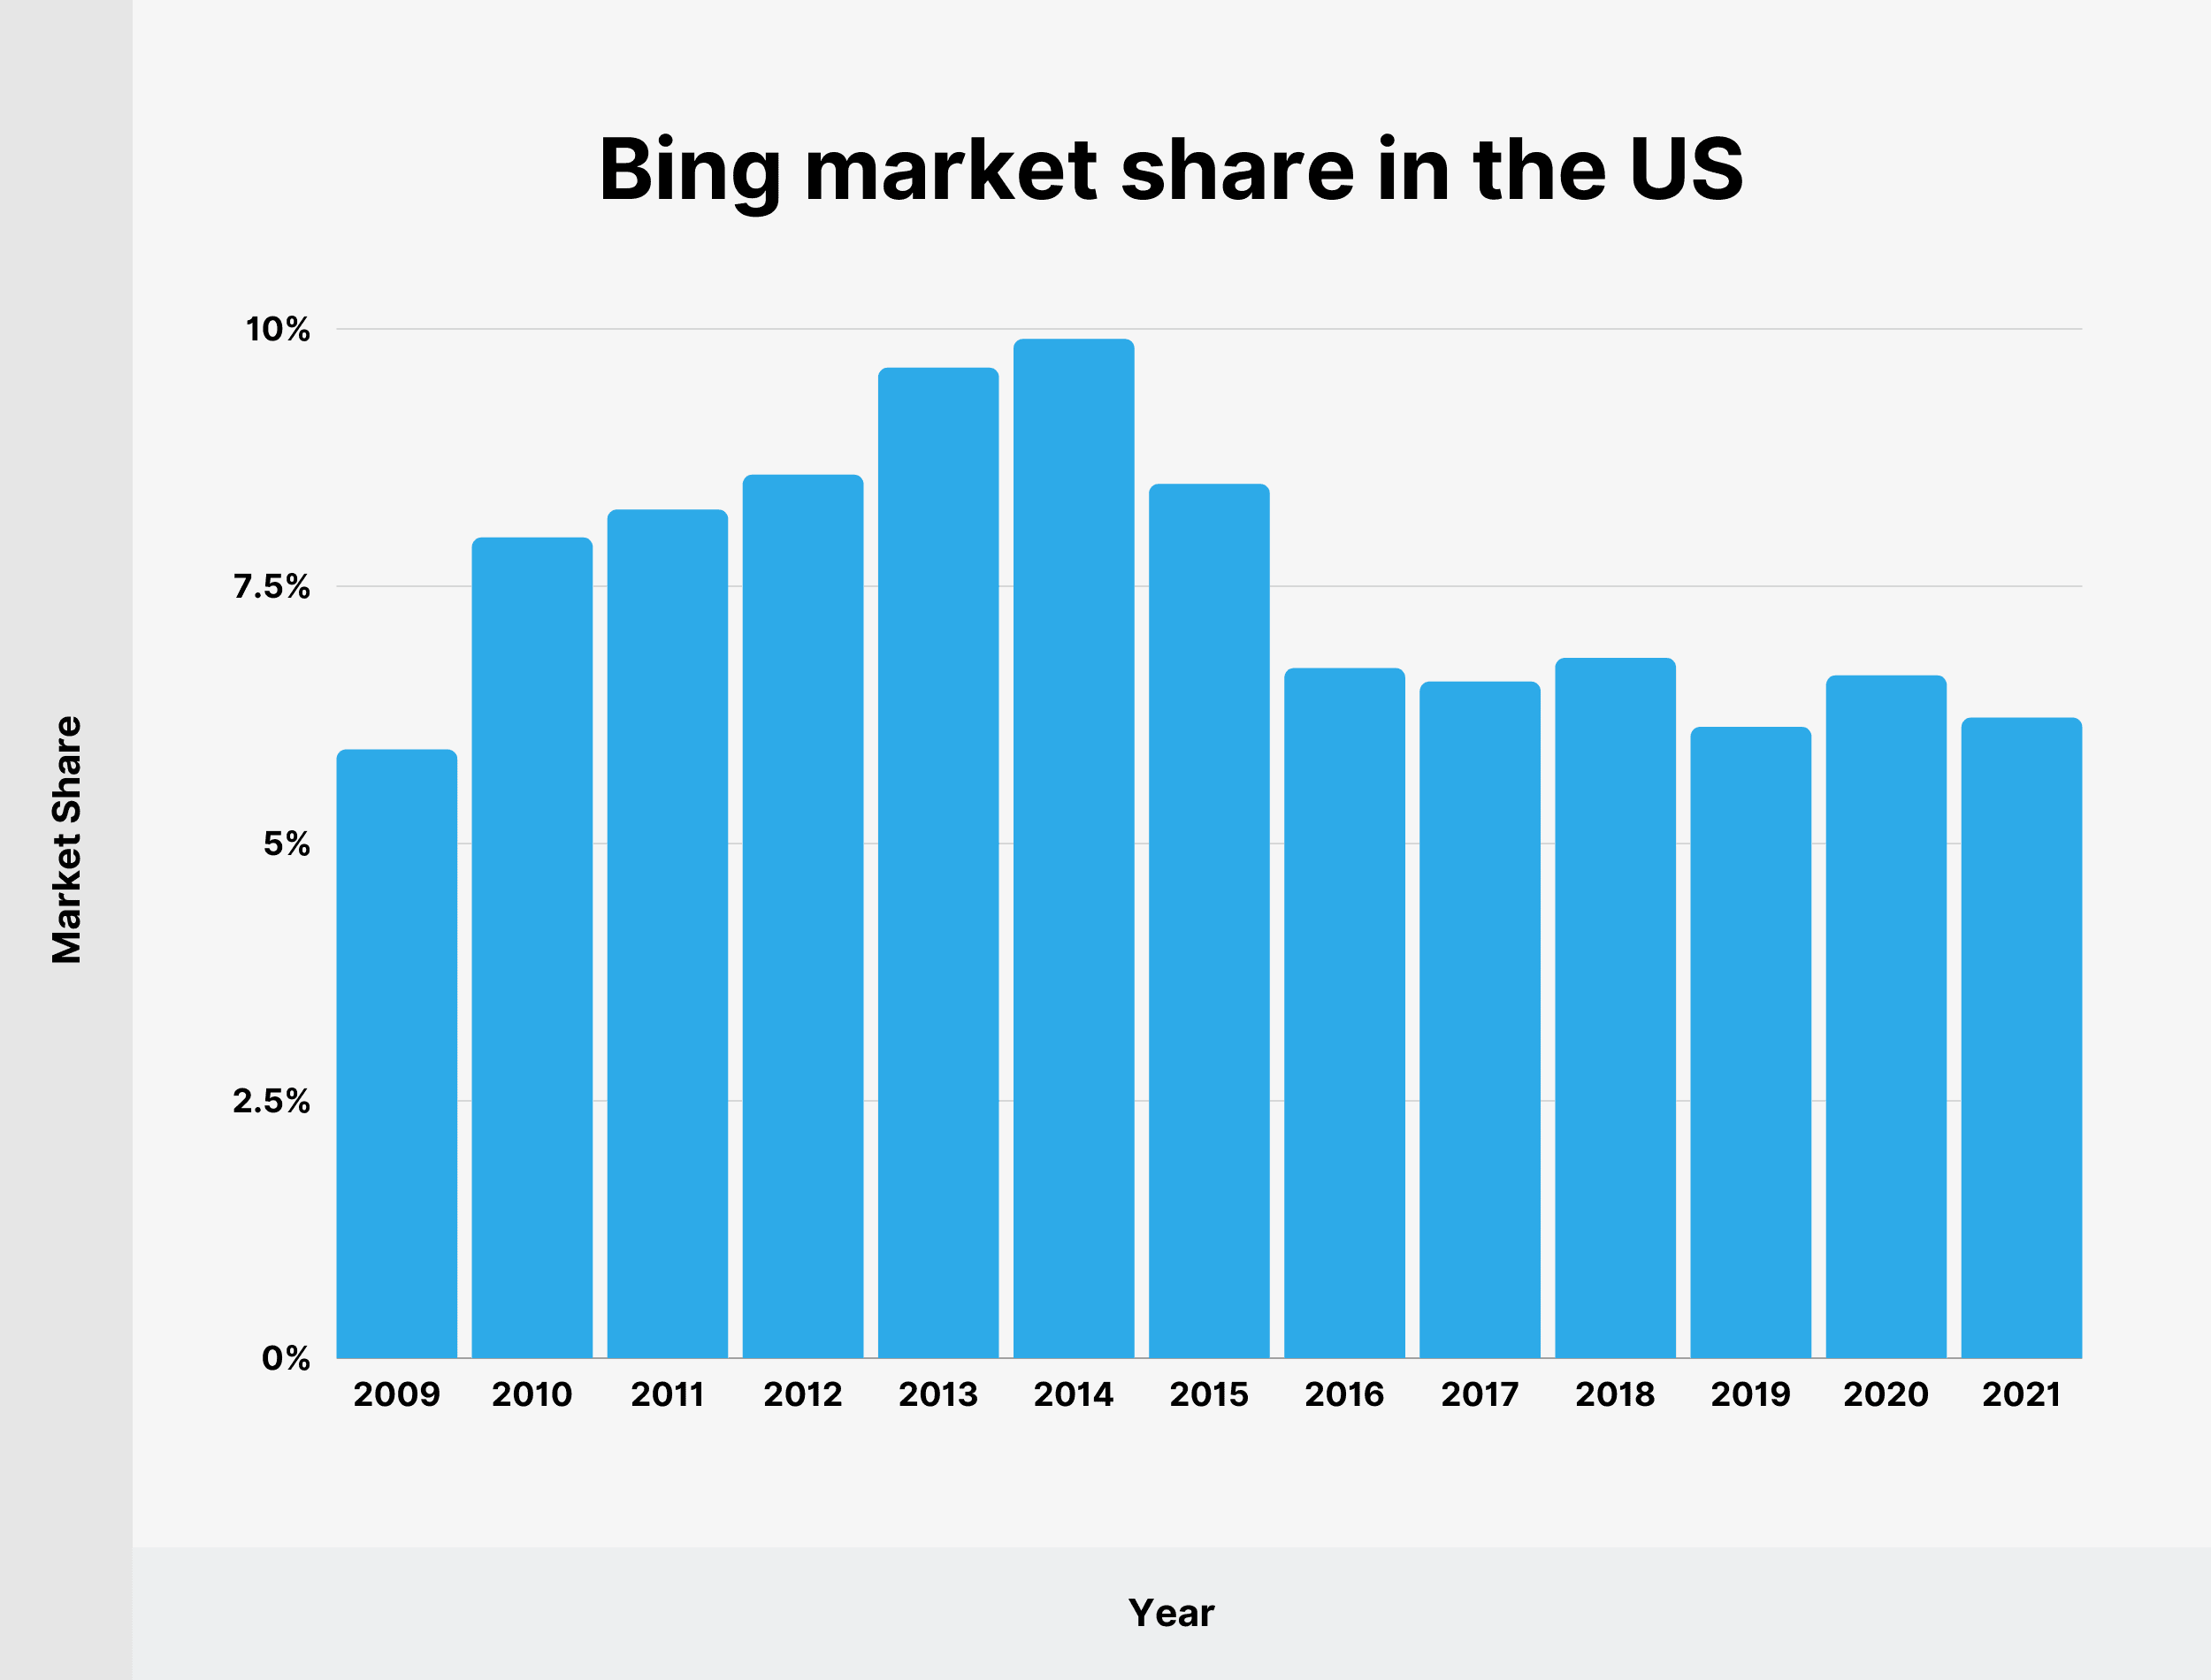 Bing market share in the US